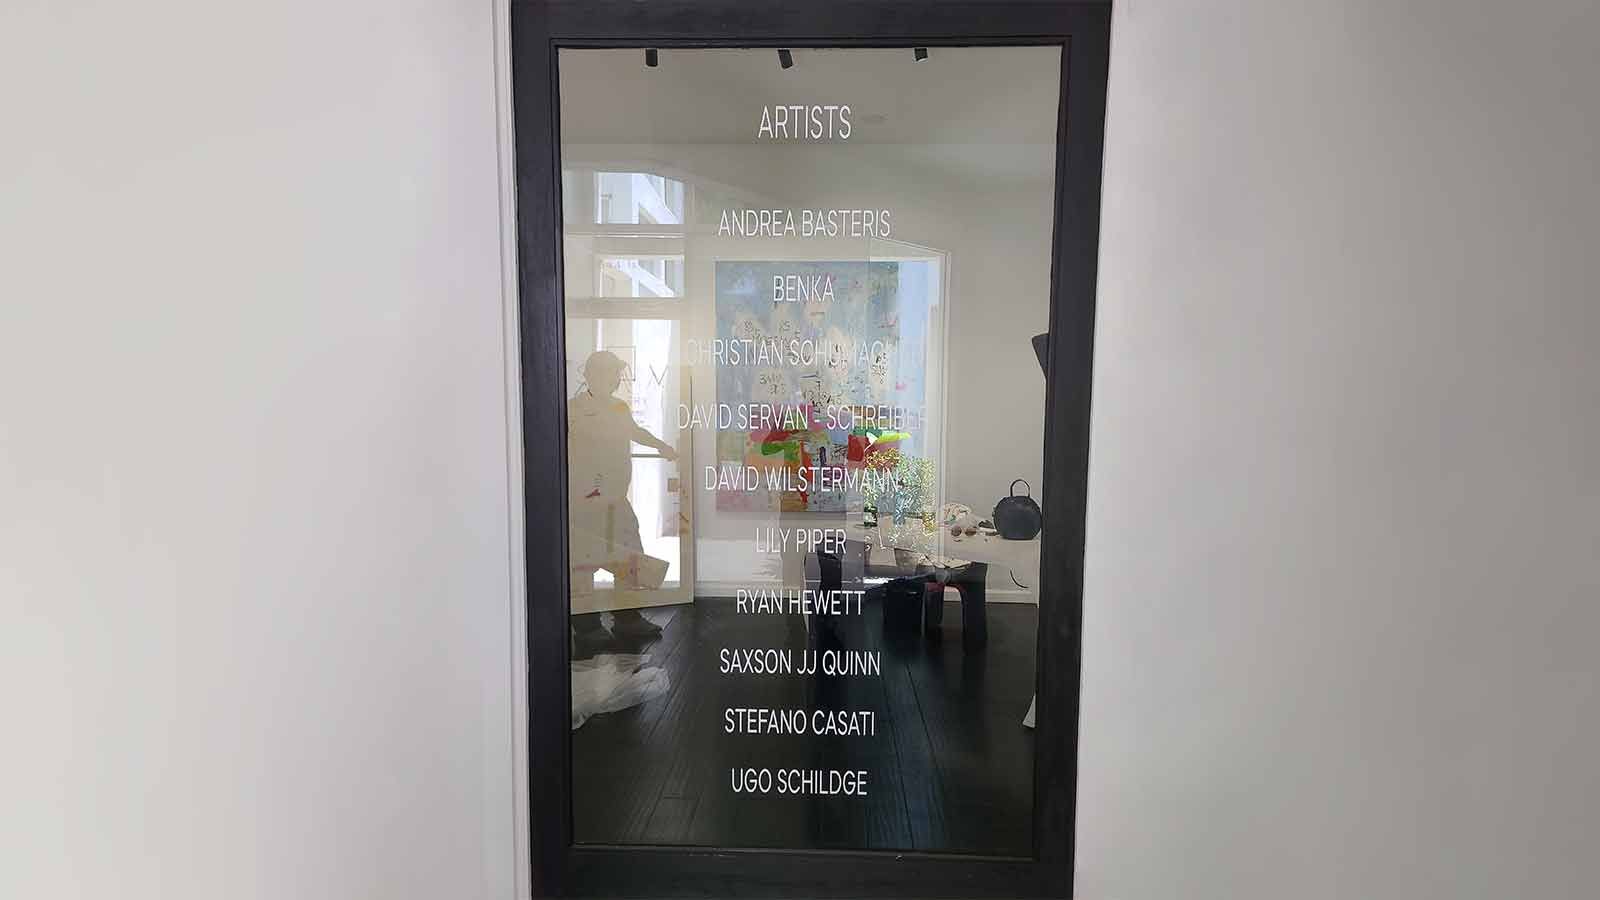 Simple vinyl lettering attached to the glass